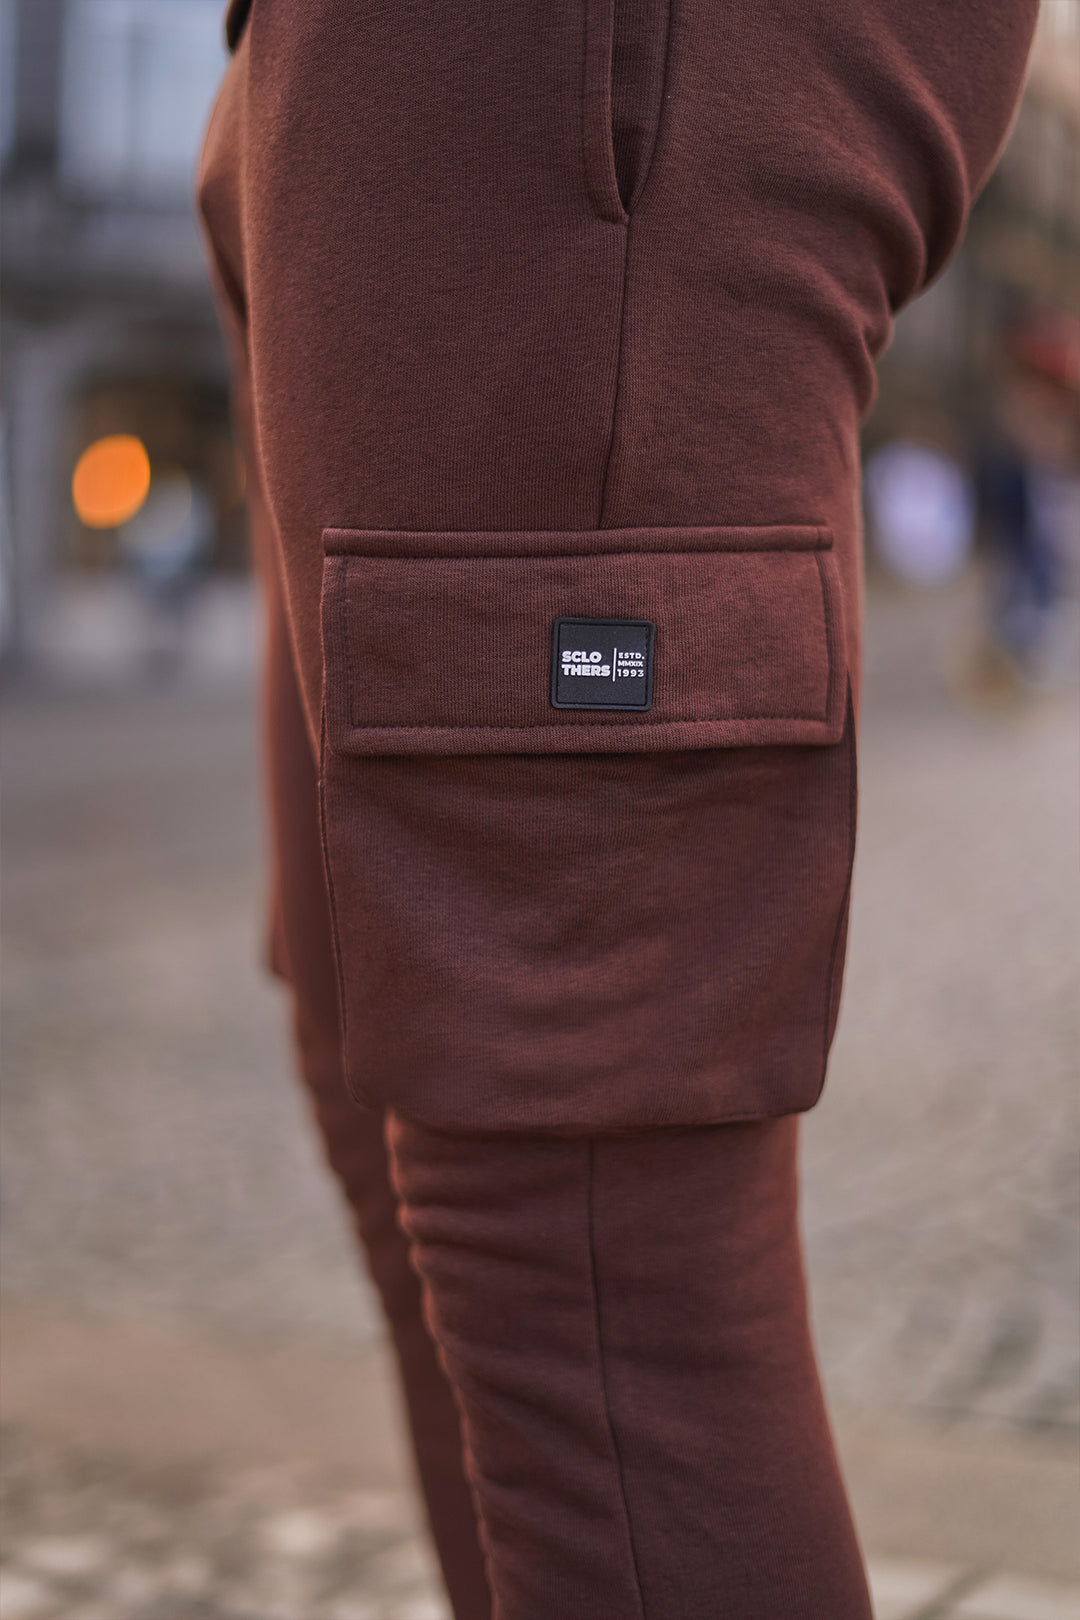 Sclothers Brown Cargo Jog Pants - W23 - MTR093R